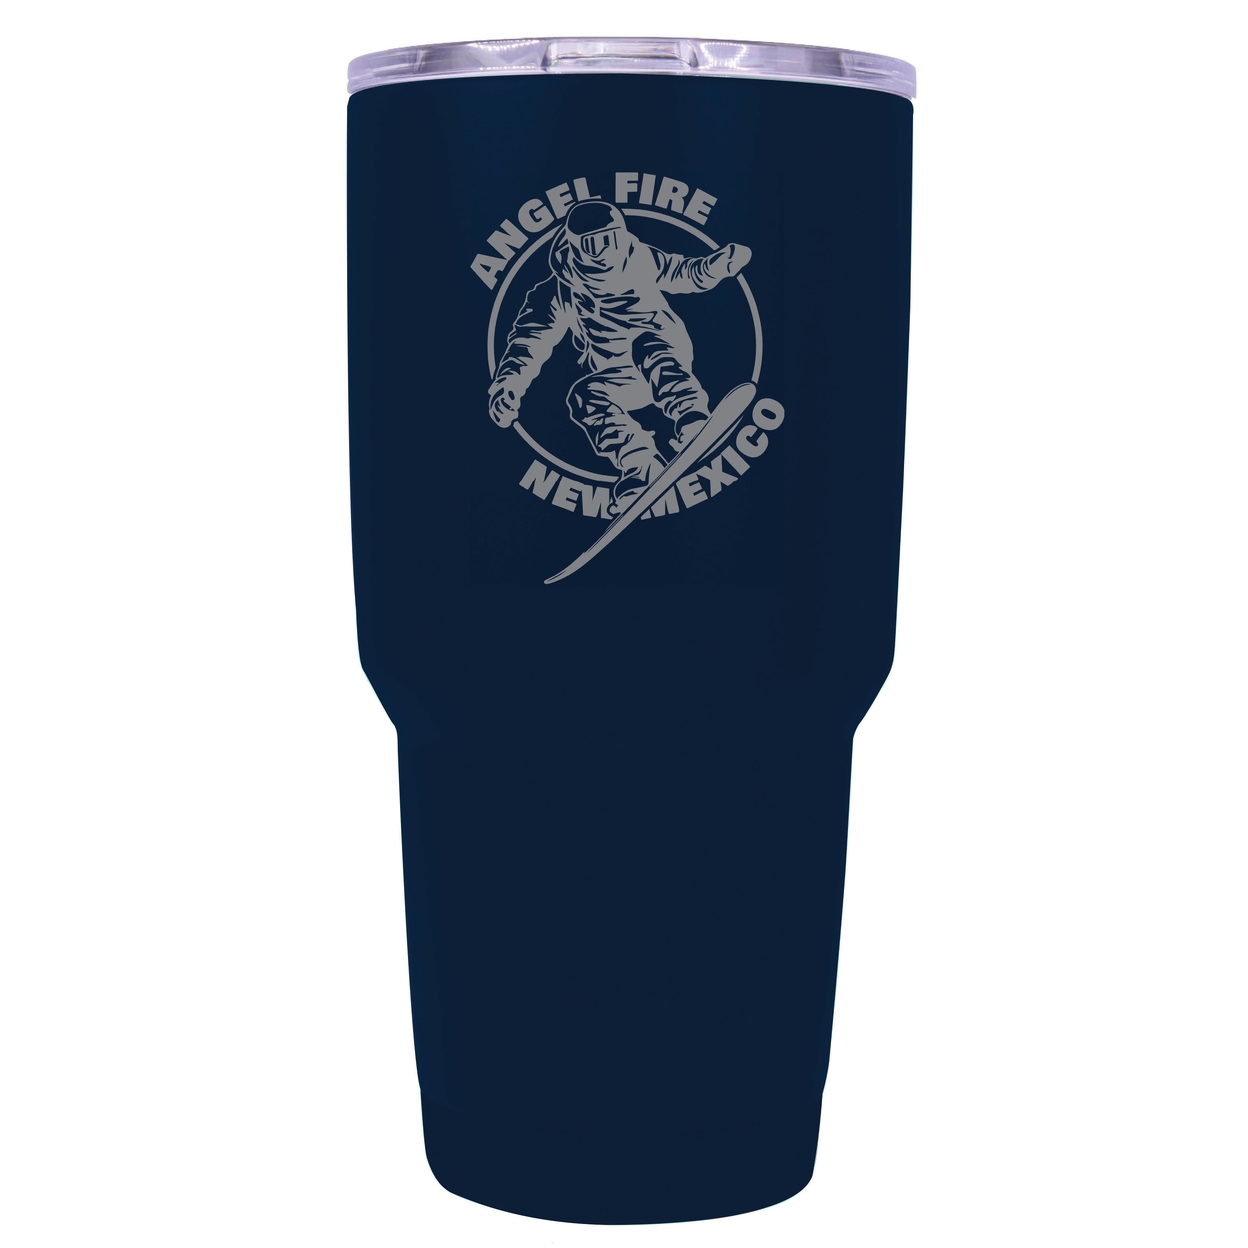 Angel Fire New Mexico Souvenir 24 Oz Engraved Insulated Stainless Steel Tumbler - Navy,,Single Unit